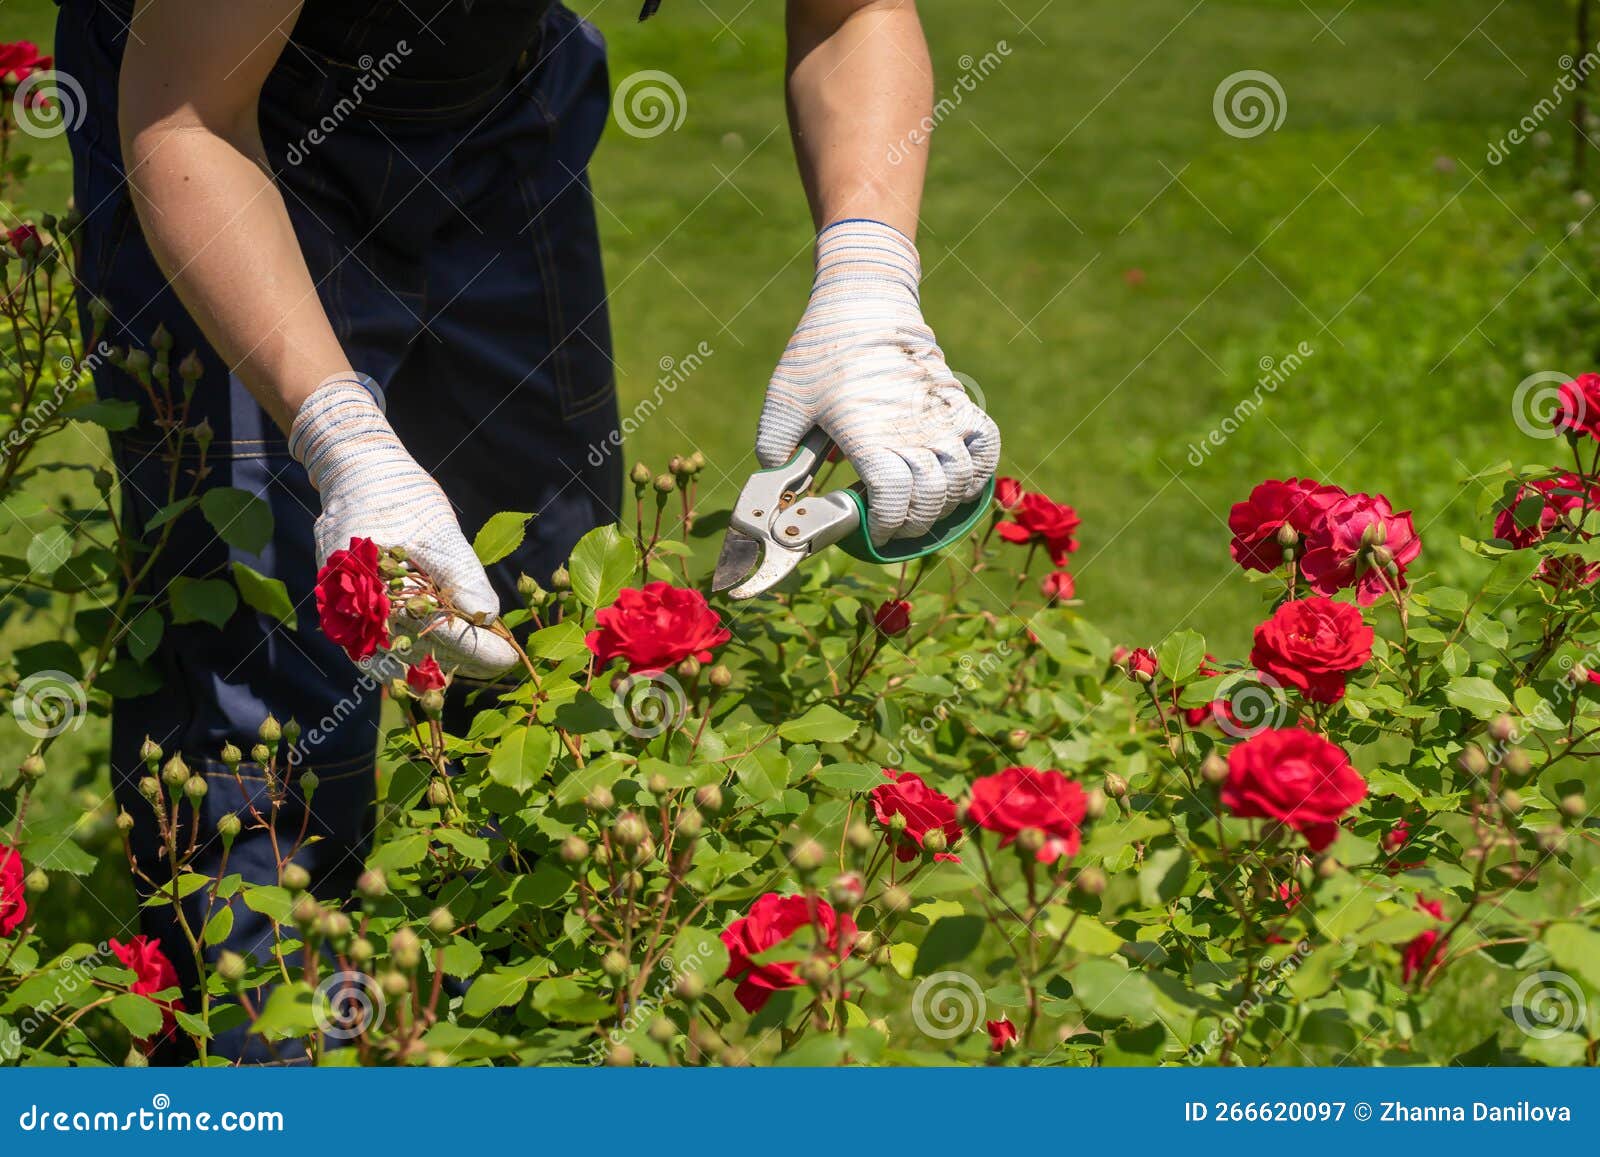 A Young Man is Trimming a Rose Bush Stock Image - Image of bloom, grass ...